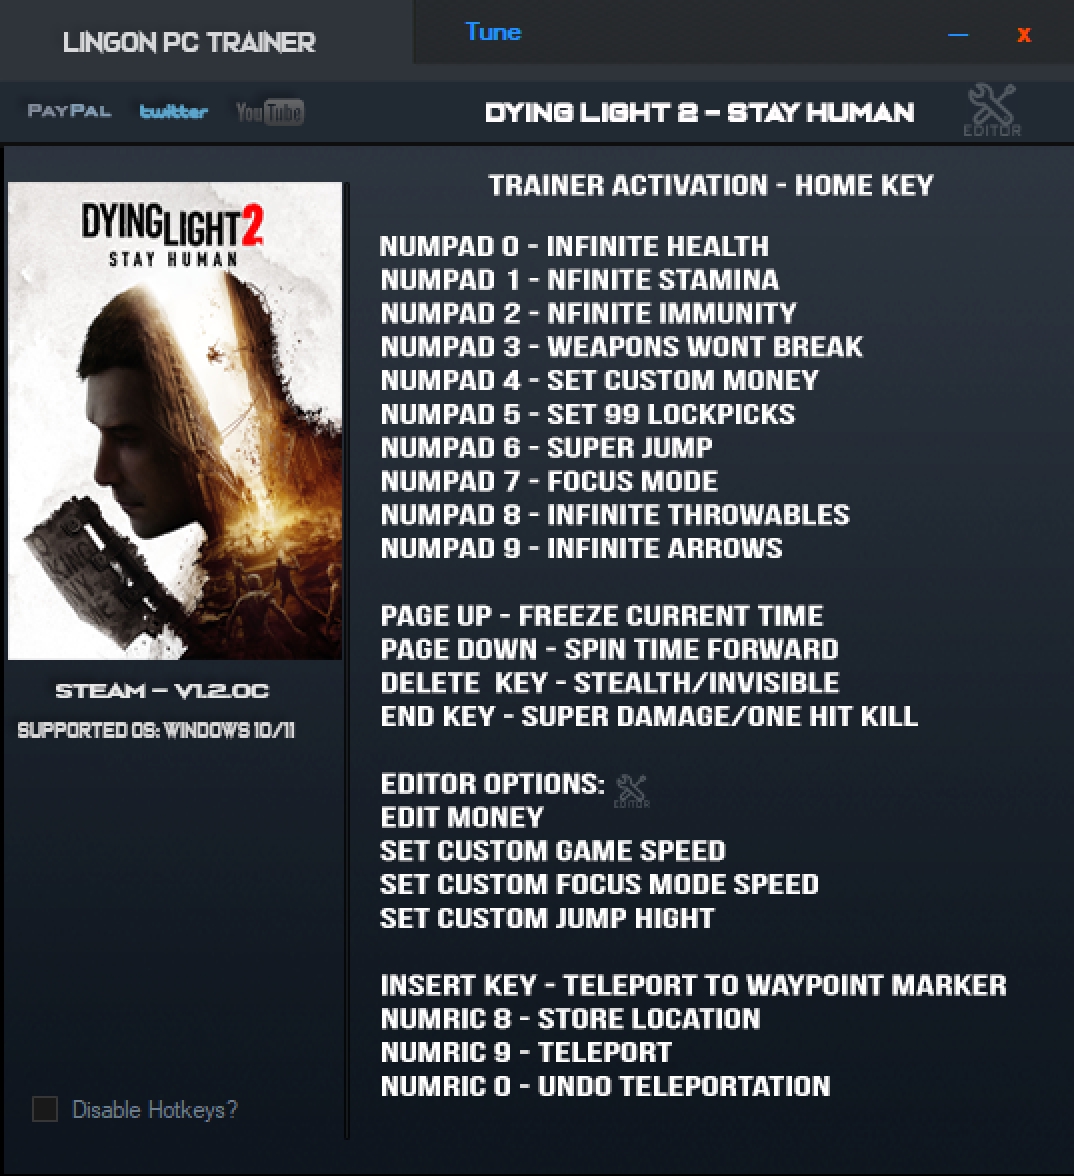 Steam is required in order to play dying light перевод на русский фото 53